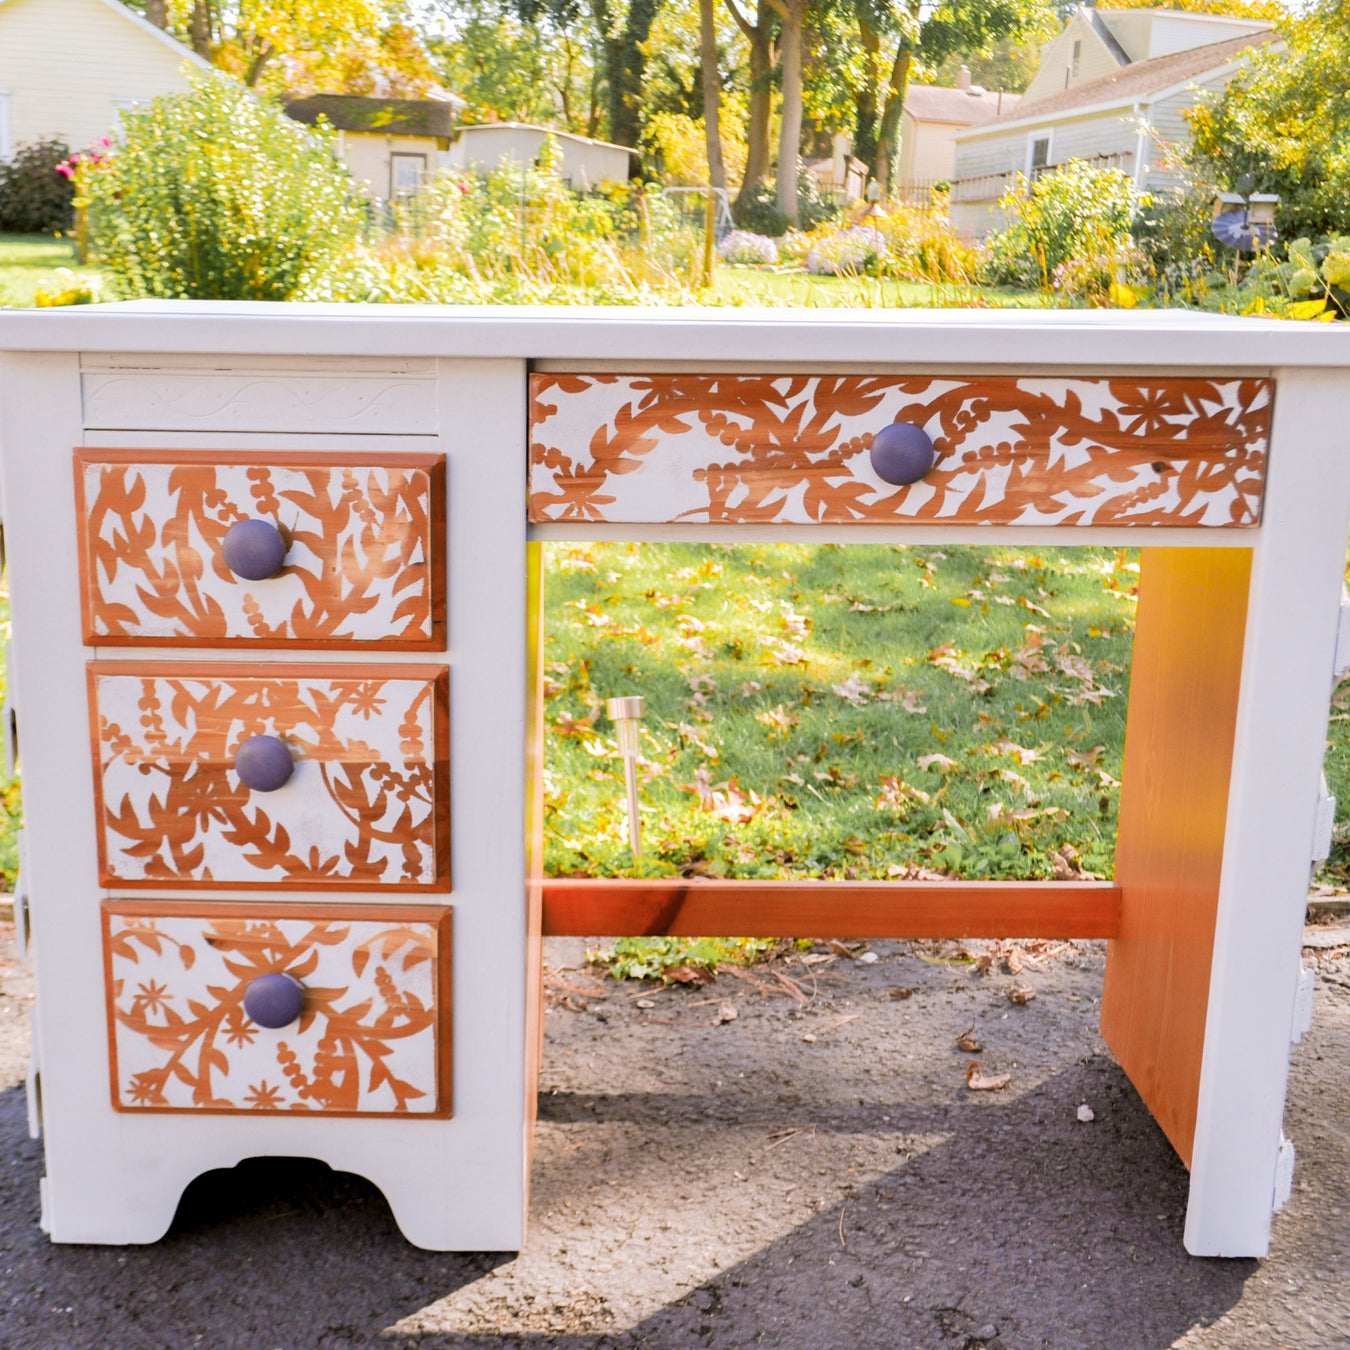 wooden desk painted with japanese ornate pattern painted on its drawers using japanese stencil